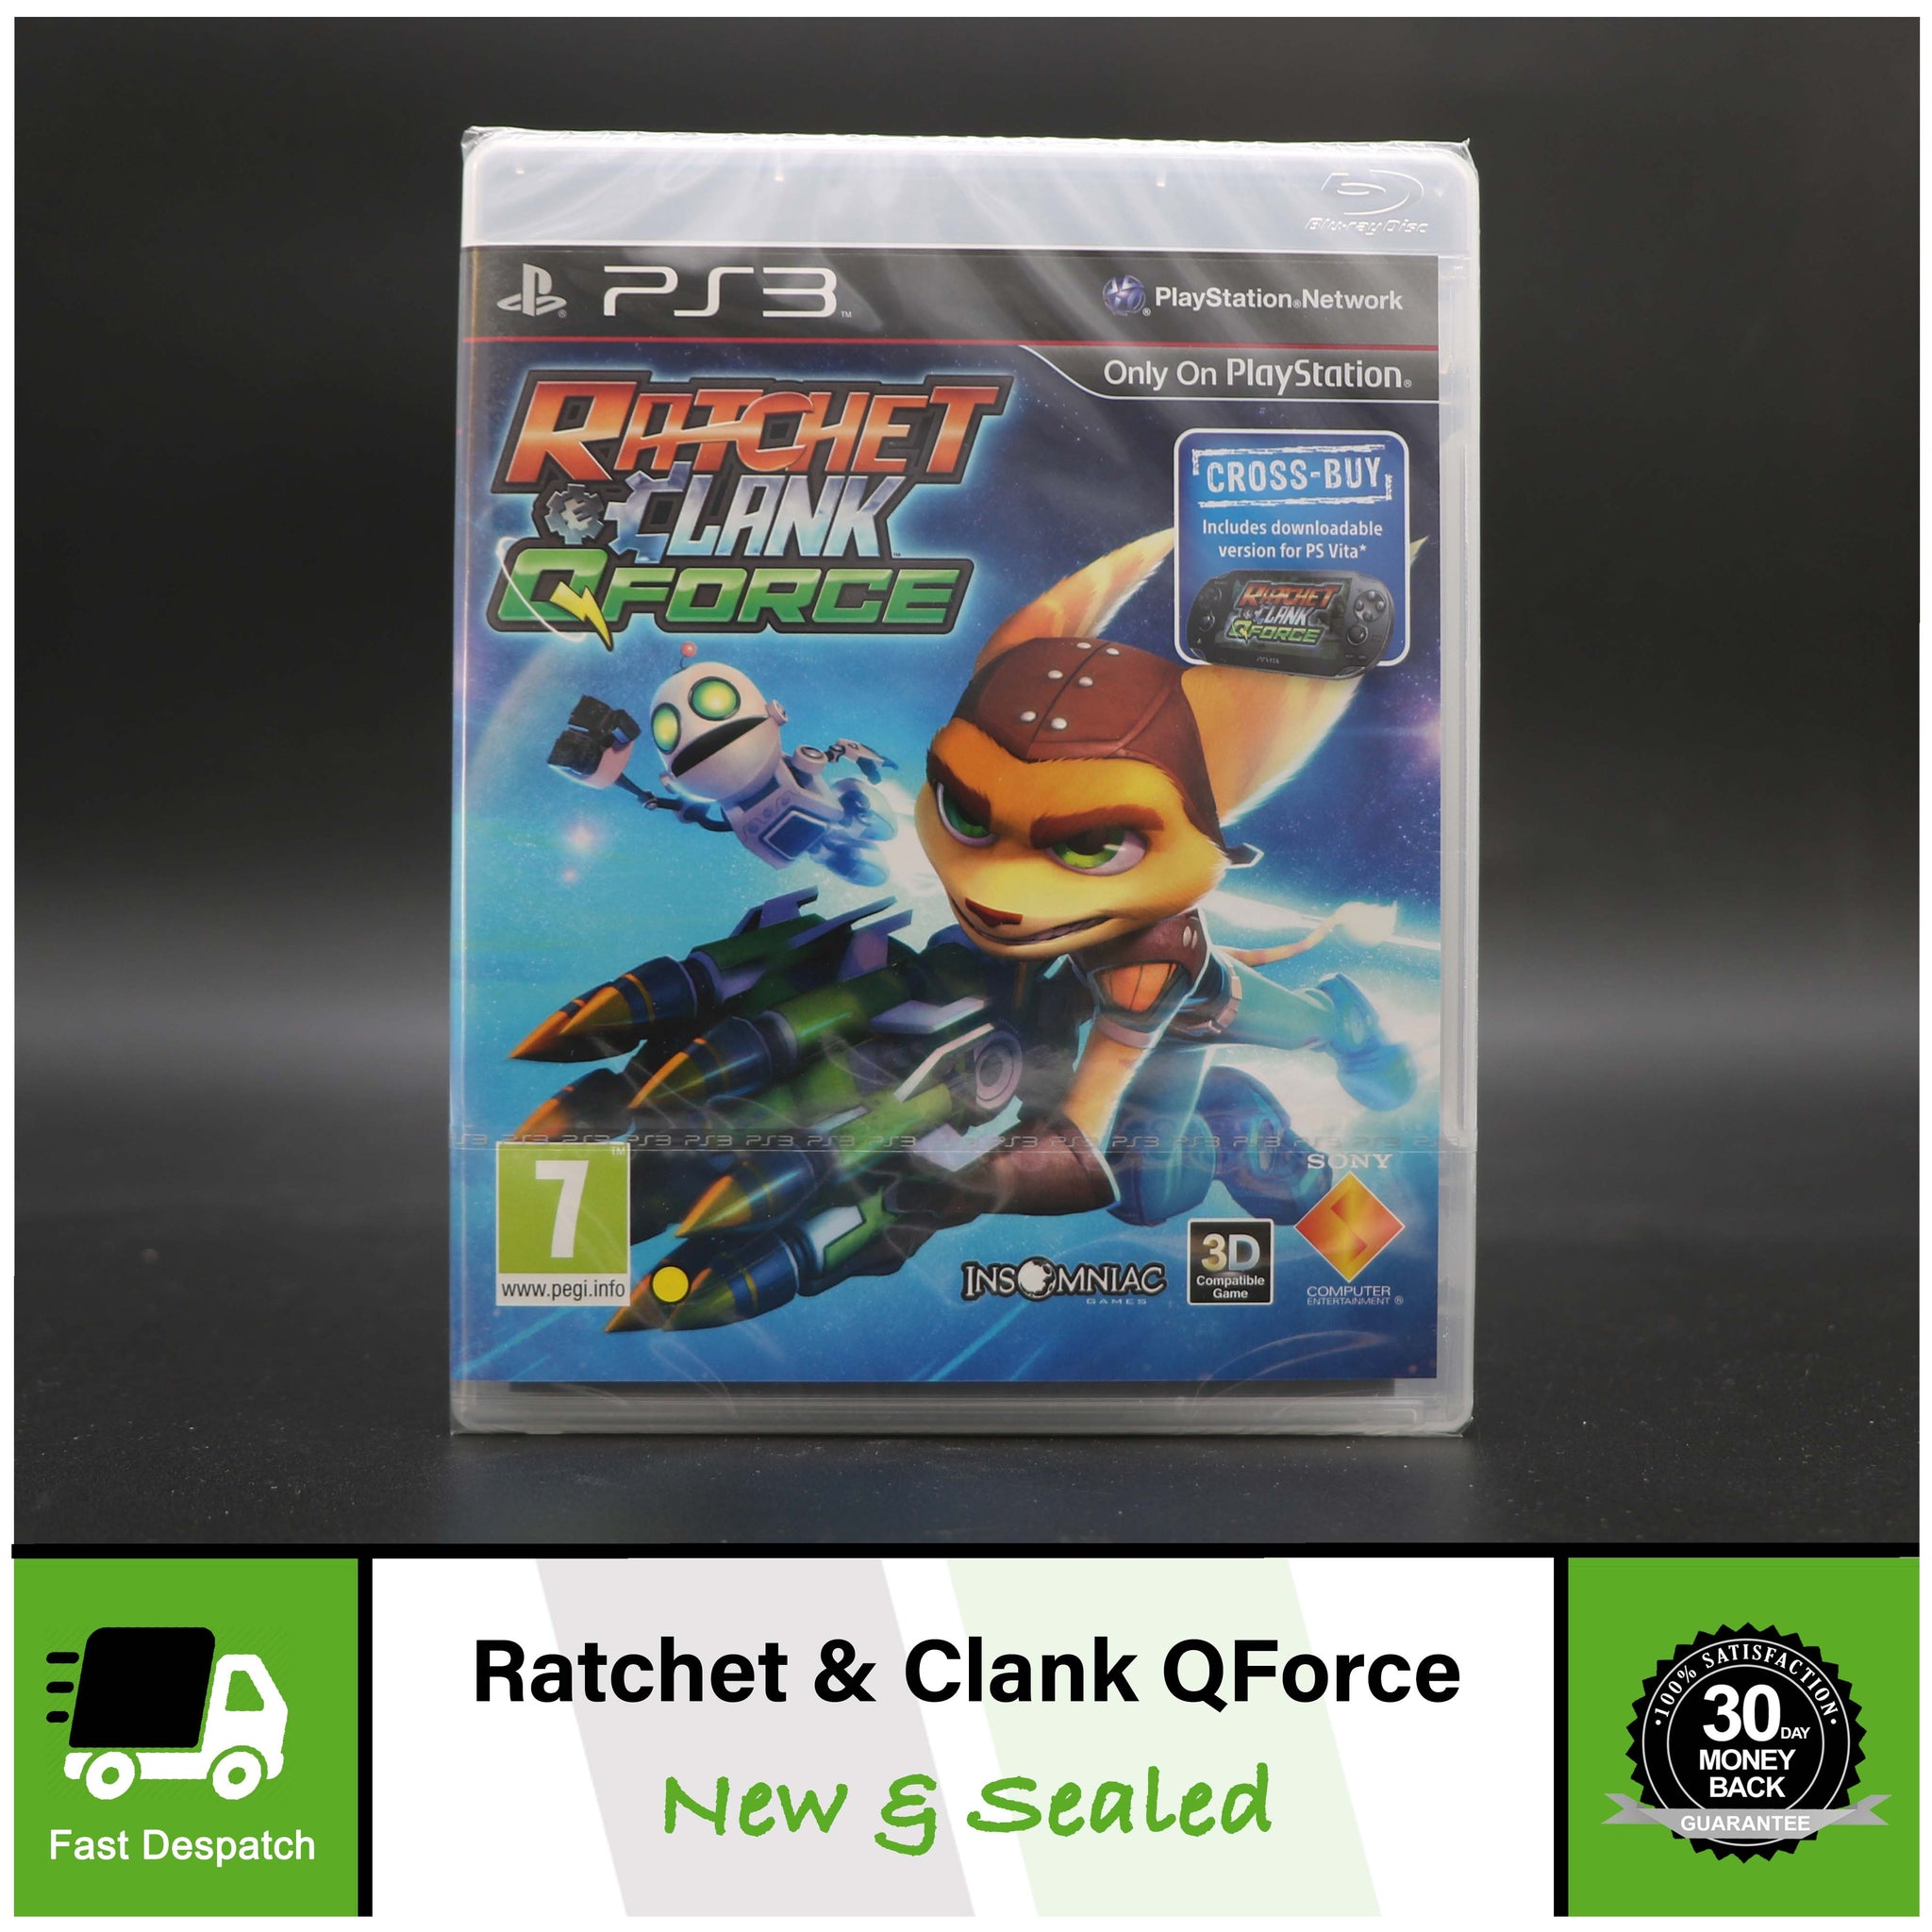 Ratchet & Clank | Q-Force | Playstation 3 PS3 Game | New & Sealed